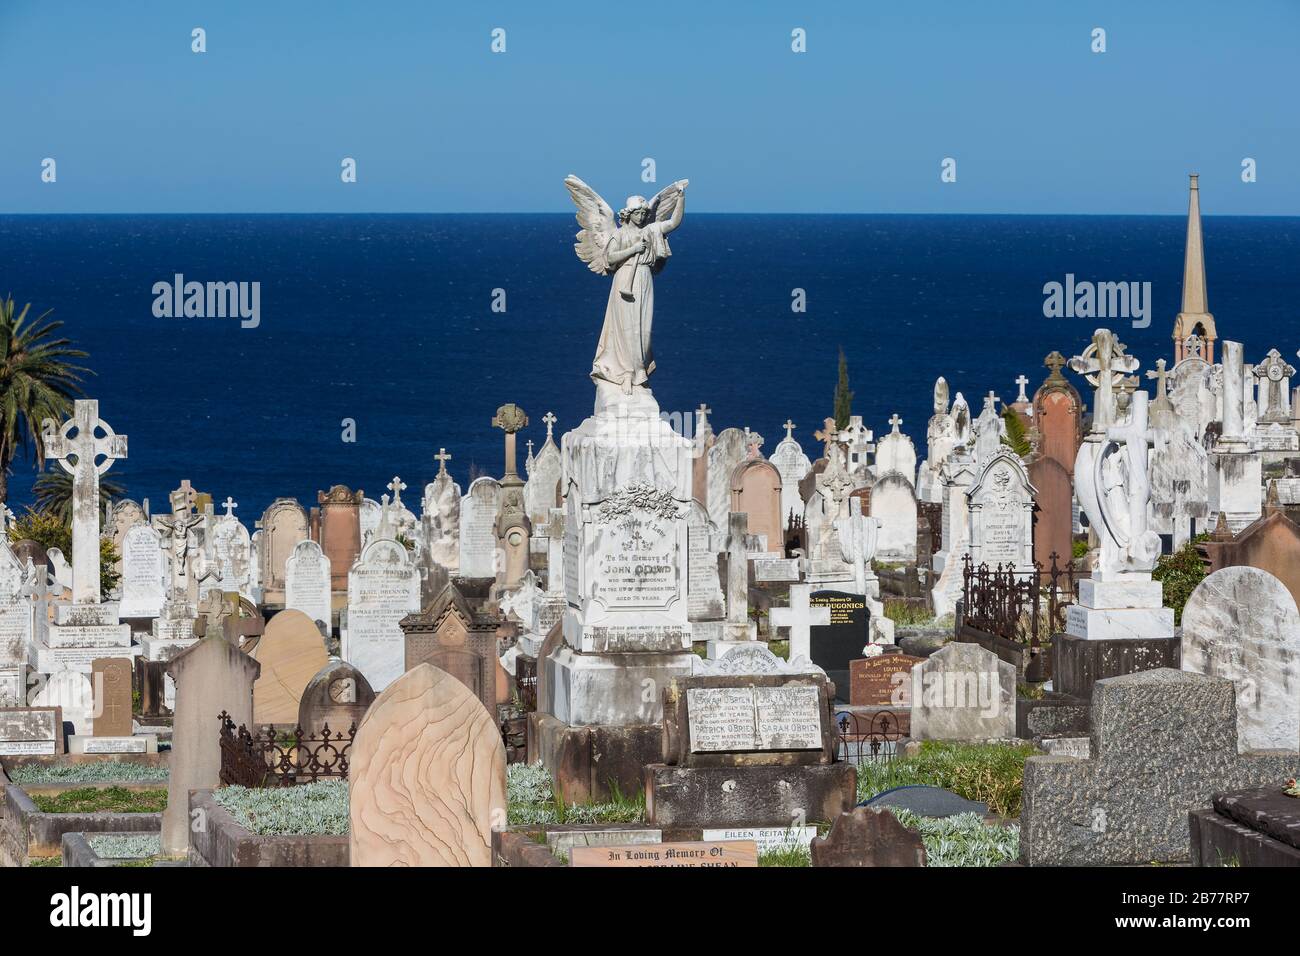 The Waverley Cemetry is a heritage-listed cemetry on top of the cliffs at Bronte in the eastern suburbs of Sydney, NSW, Australia. The coastal walk wa Stock Photo